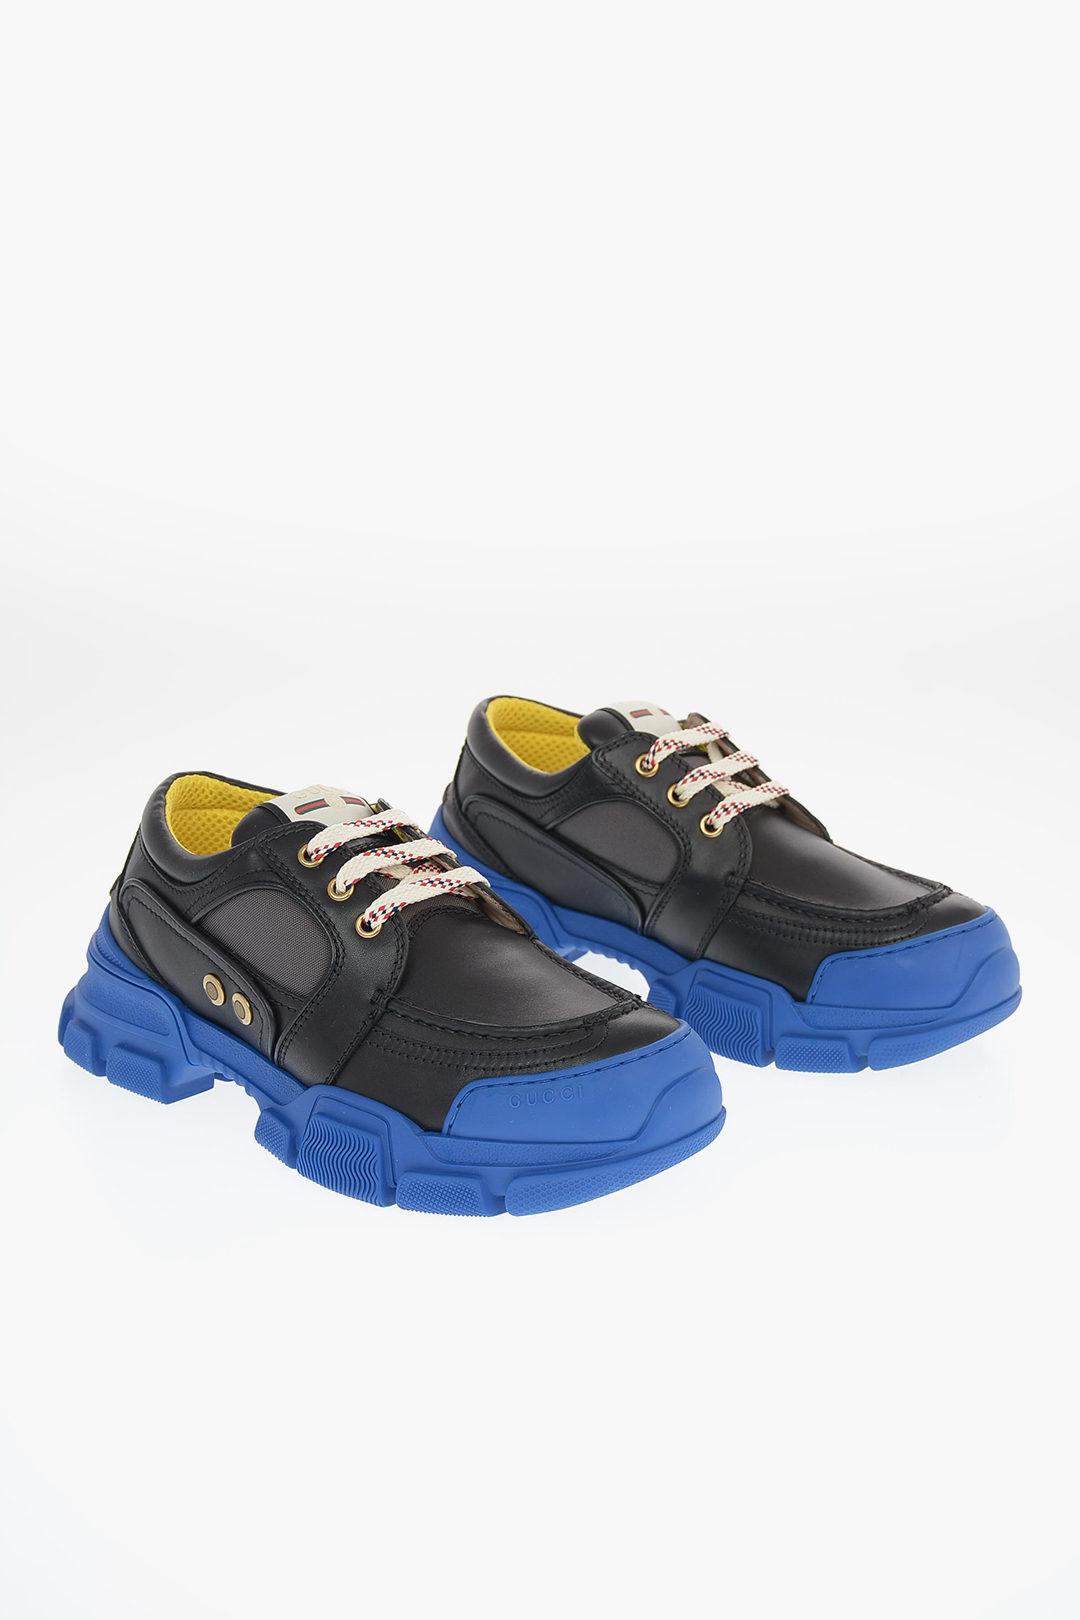 gucci track sneakers